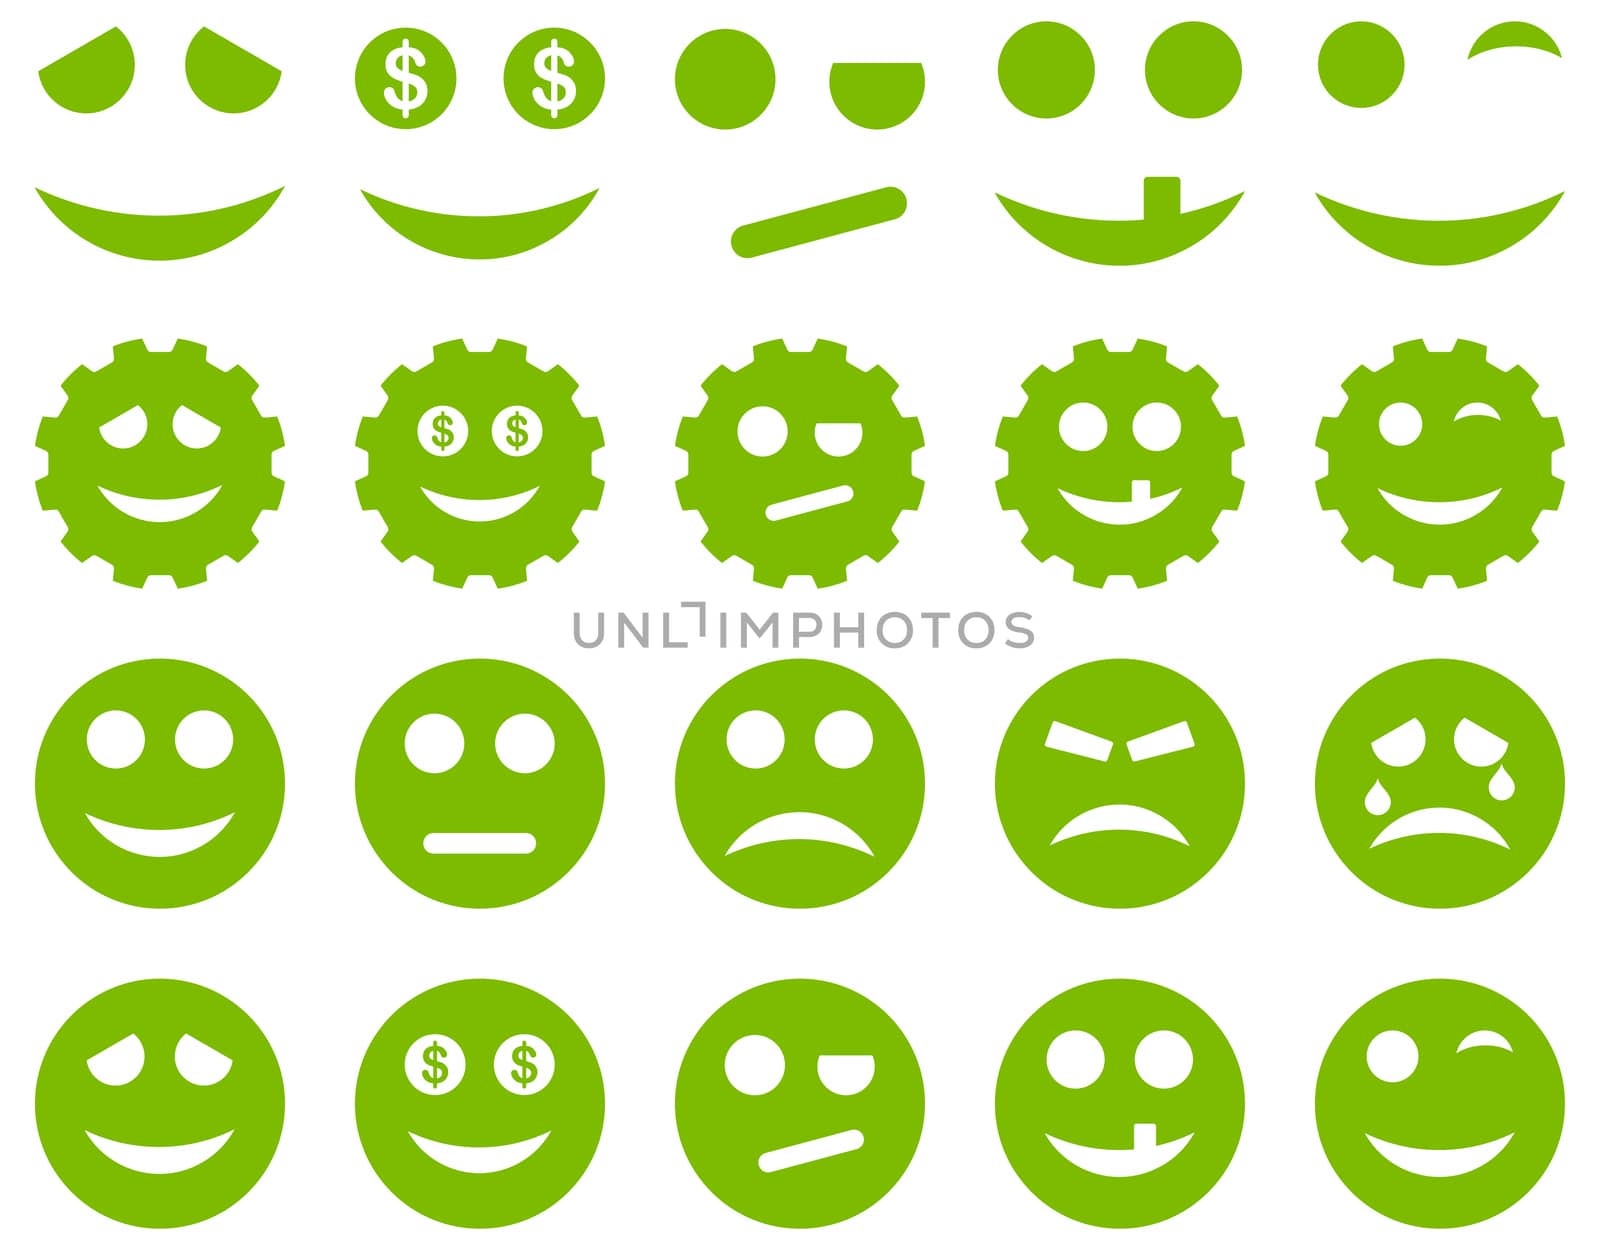 Tools, gears, smiles, emoticons icons. Glyph set style is flat images, eco green symbols, isolated on a white background.